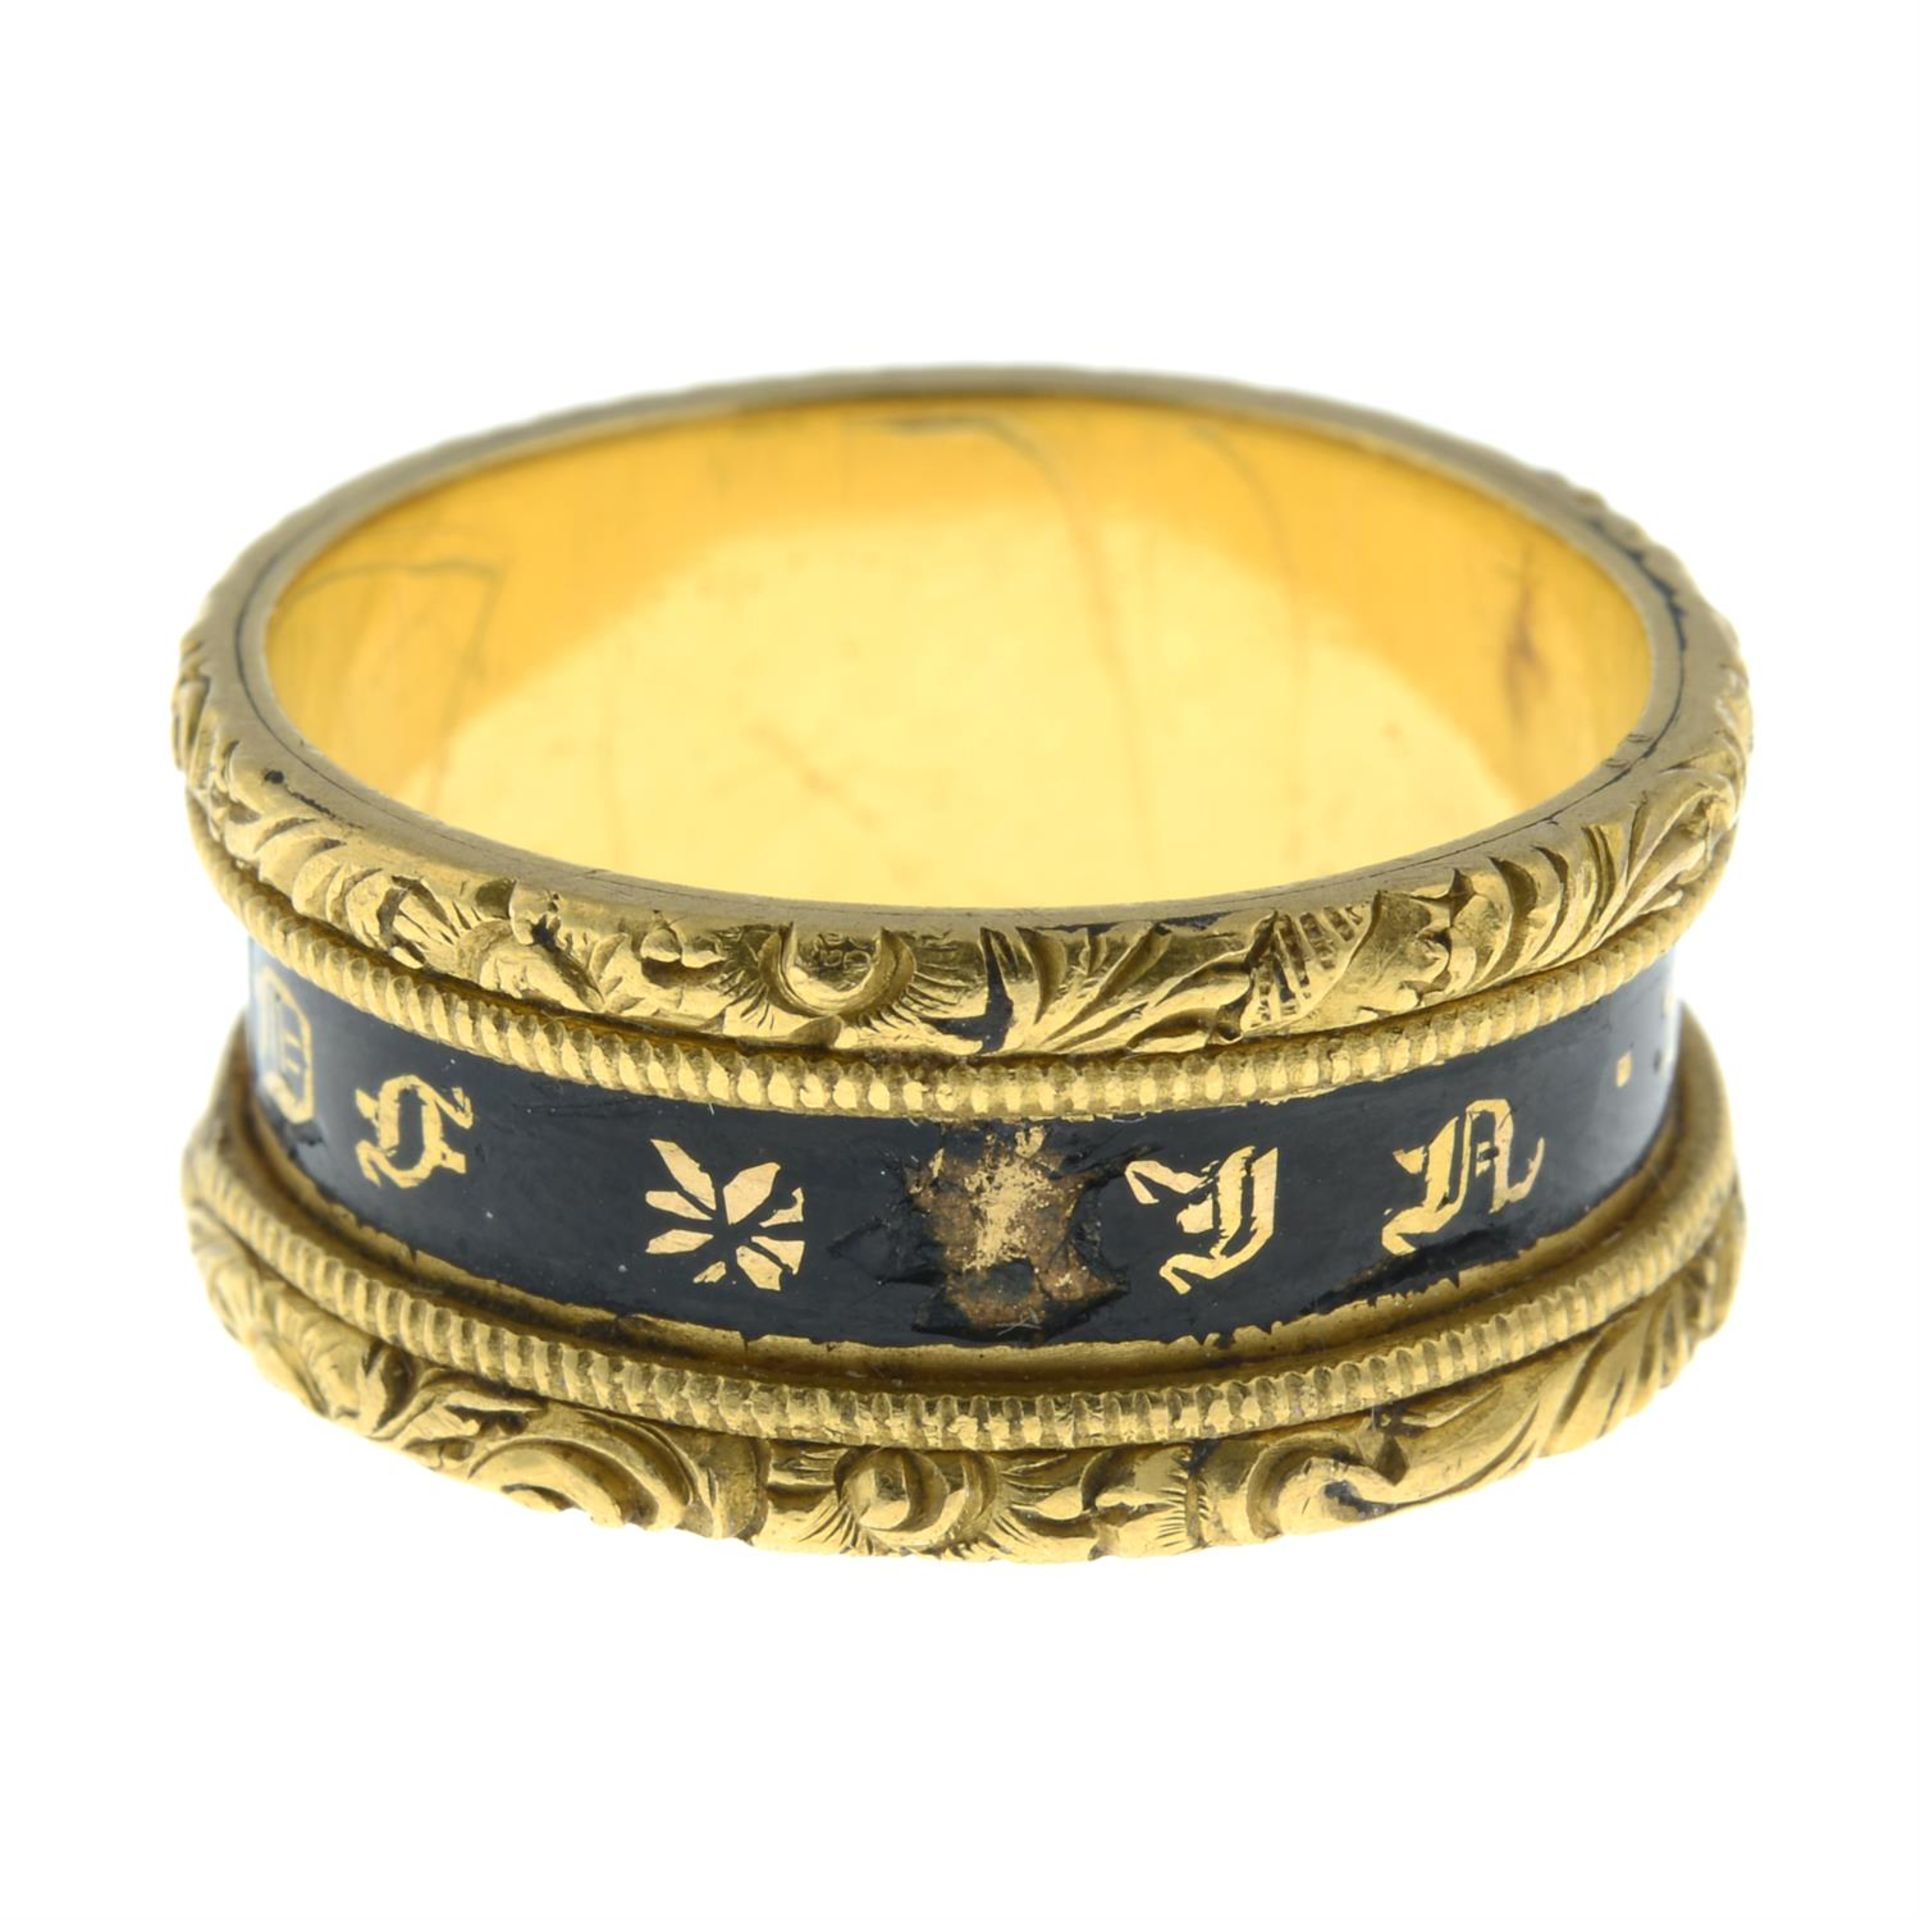 An early Victorian 22ct gold black enamel and gilt 'In Memory Of' band ring, with foliate embossed - Image 4 of 5